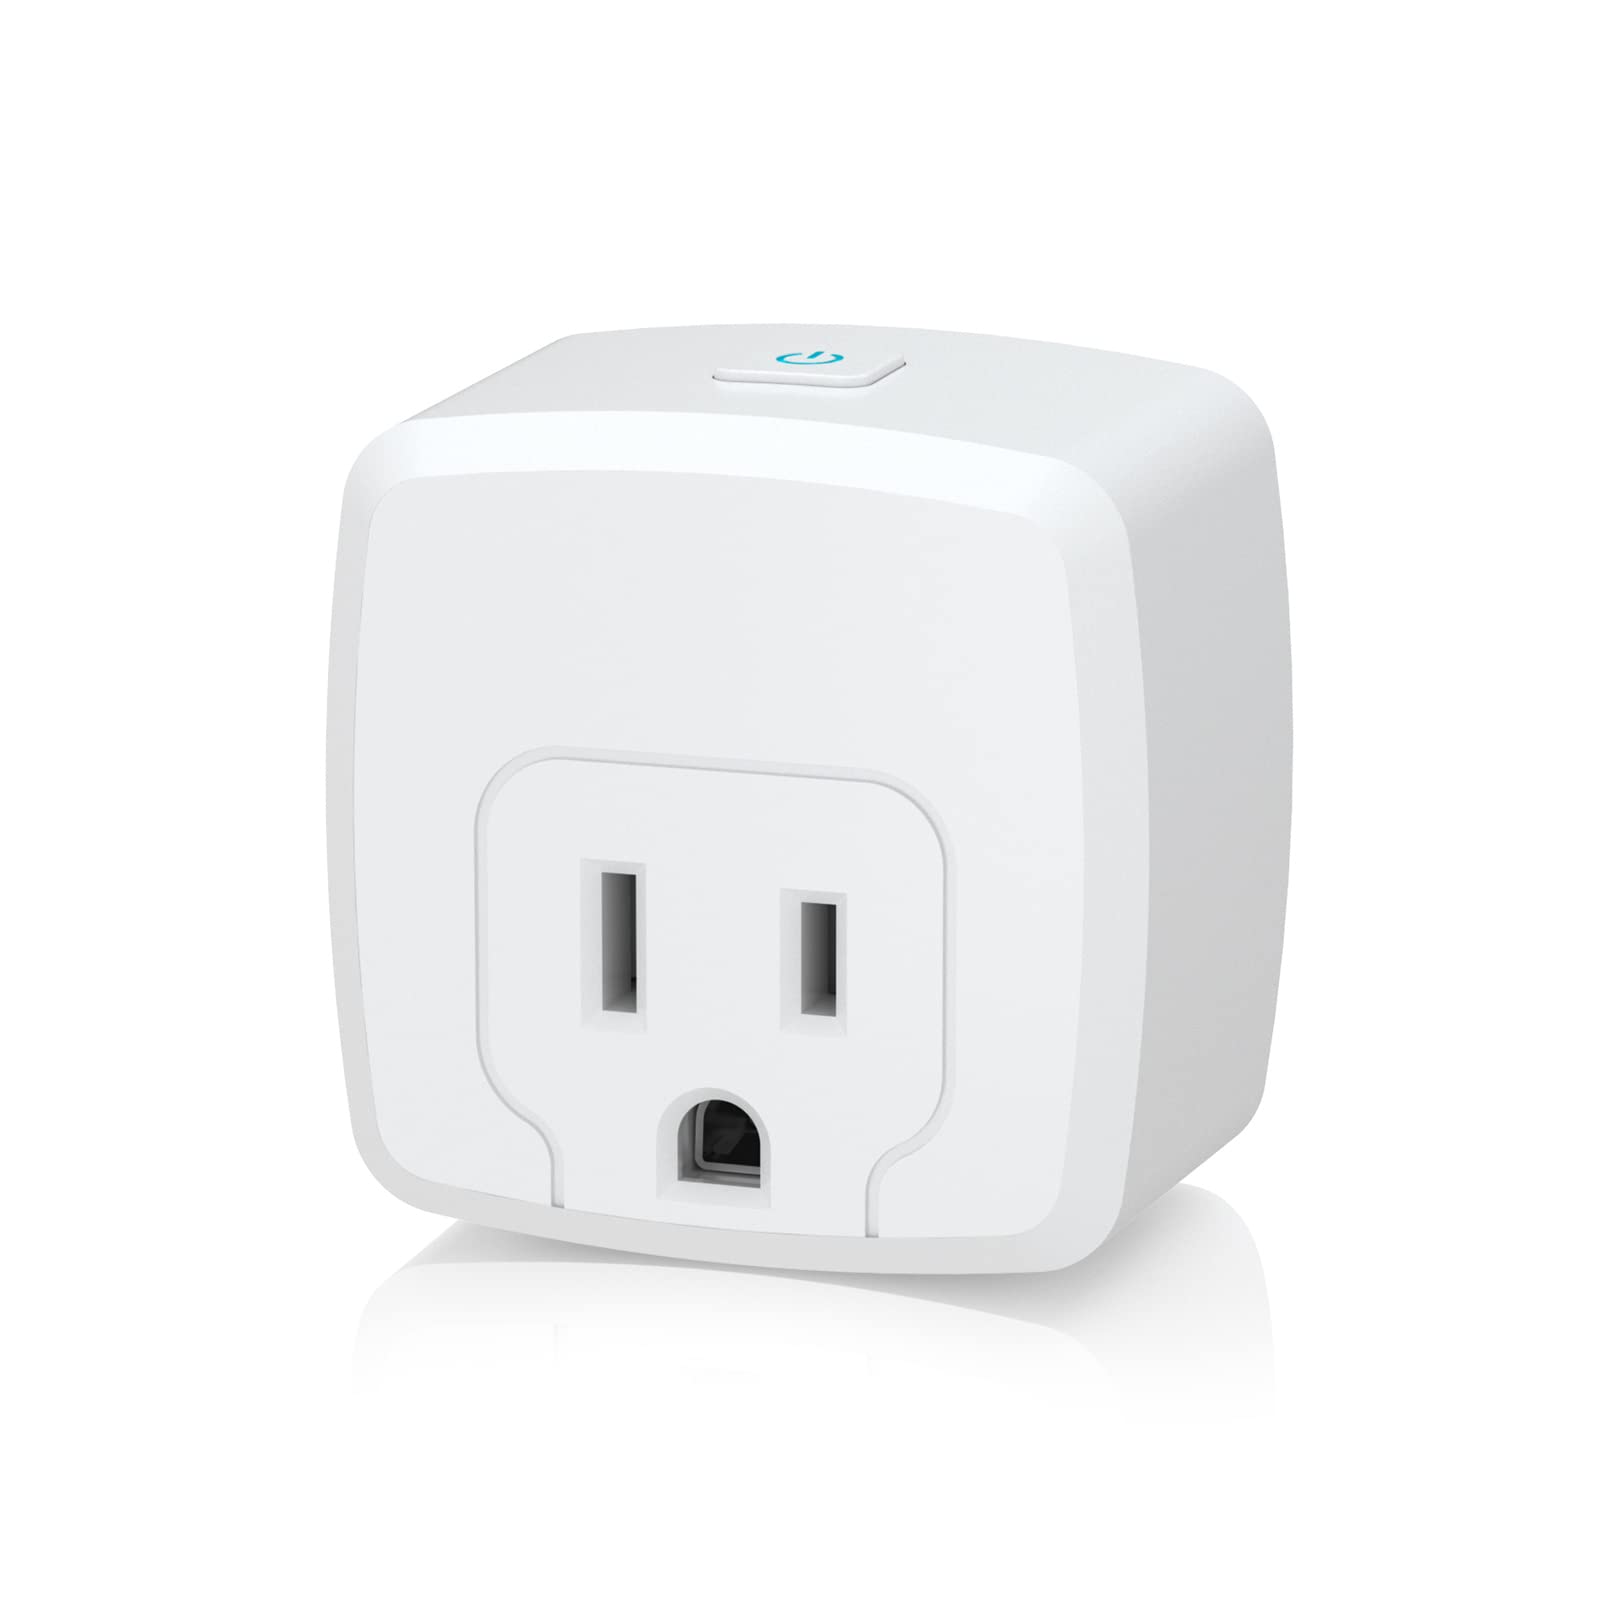 BN-LINK WiFi Heavy Duty Smart Plug Outlet, No Hub Required with